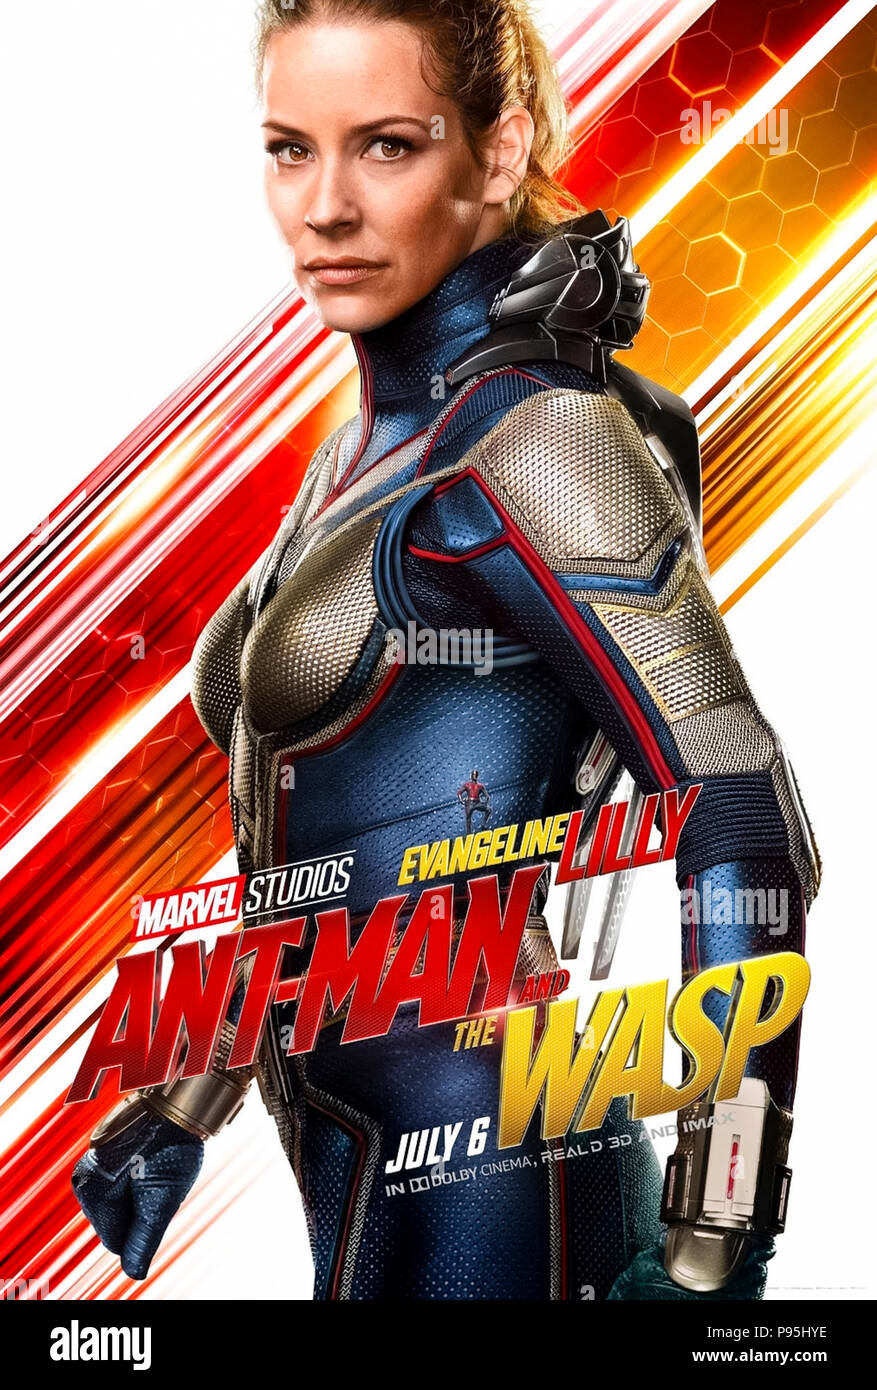 Ant-Man Poster Is Your Standard Marvel Poster